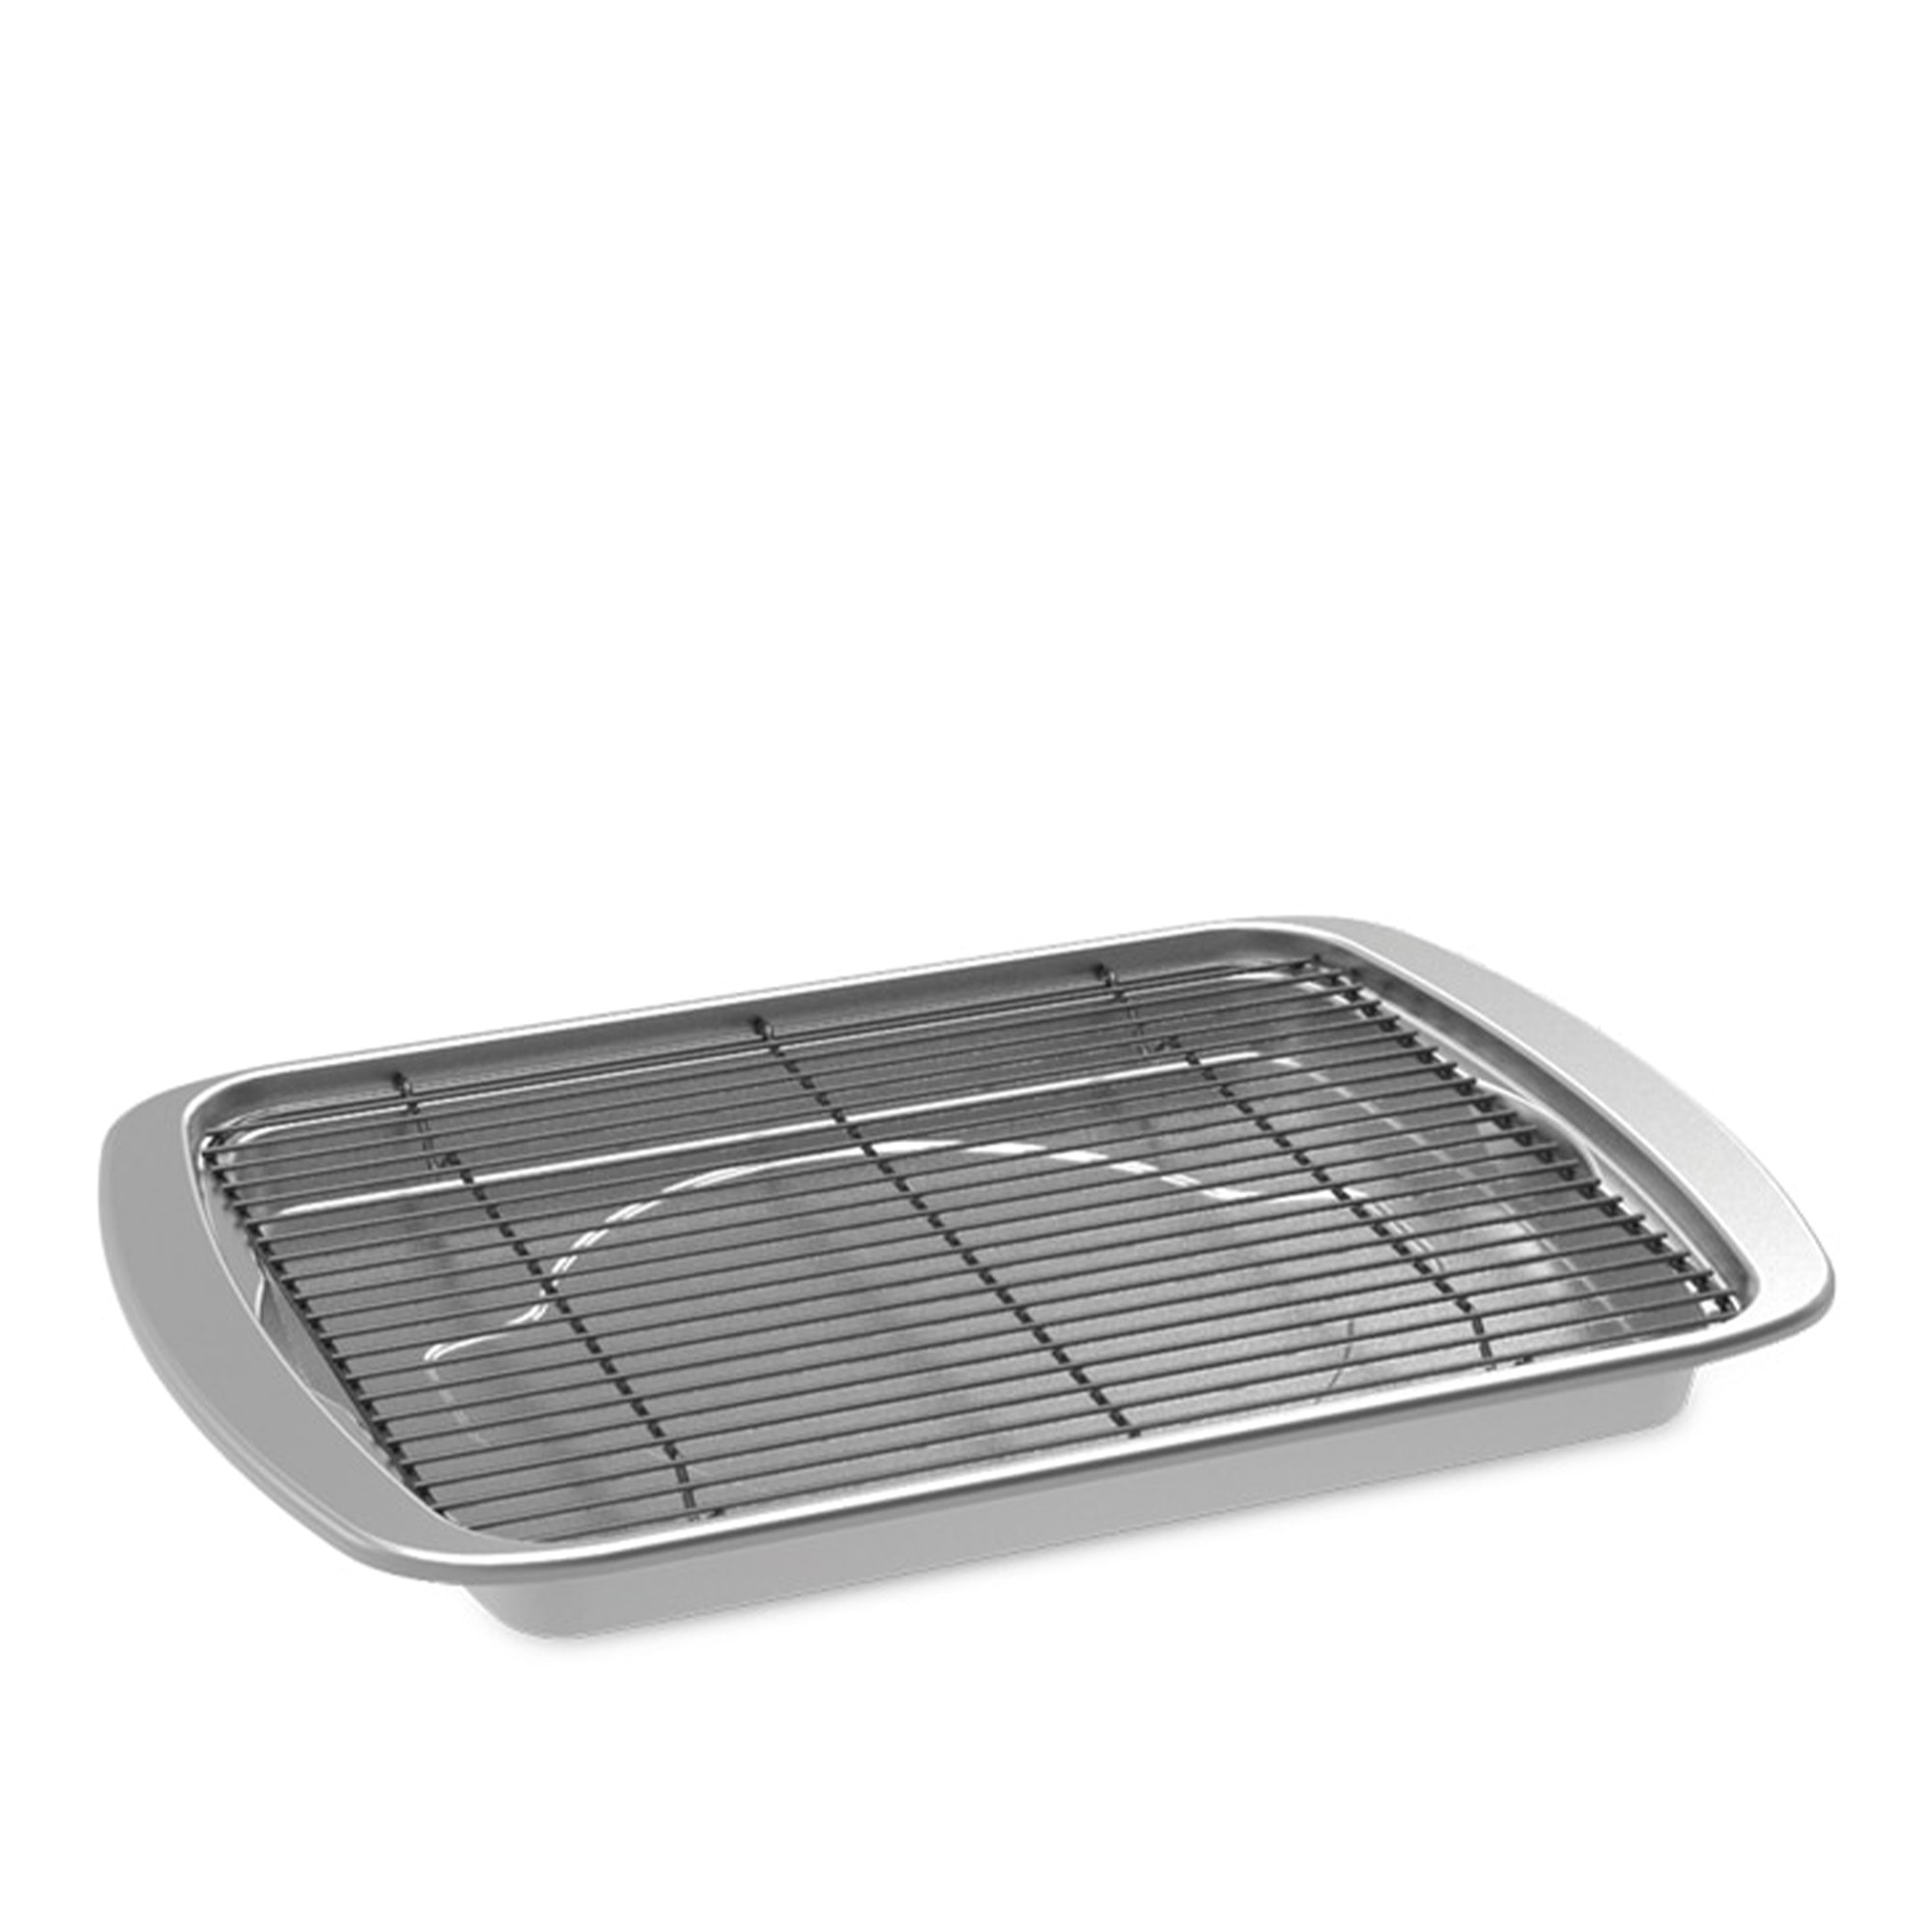 Nordic Ware Naturals Big Sheet Pan with Oven-Safe Grid